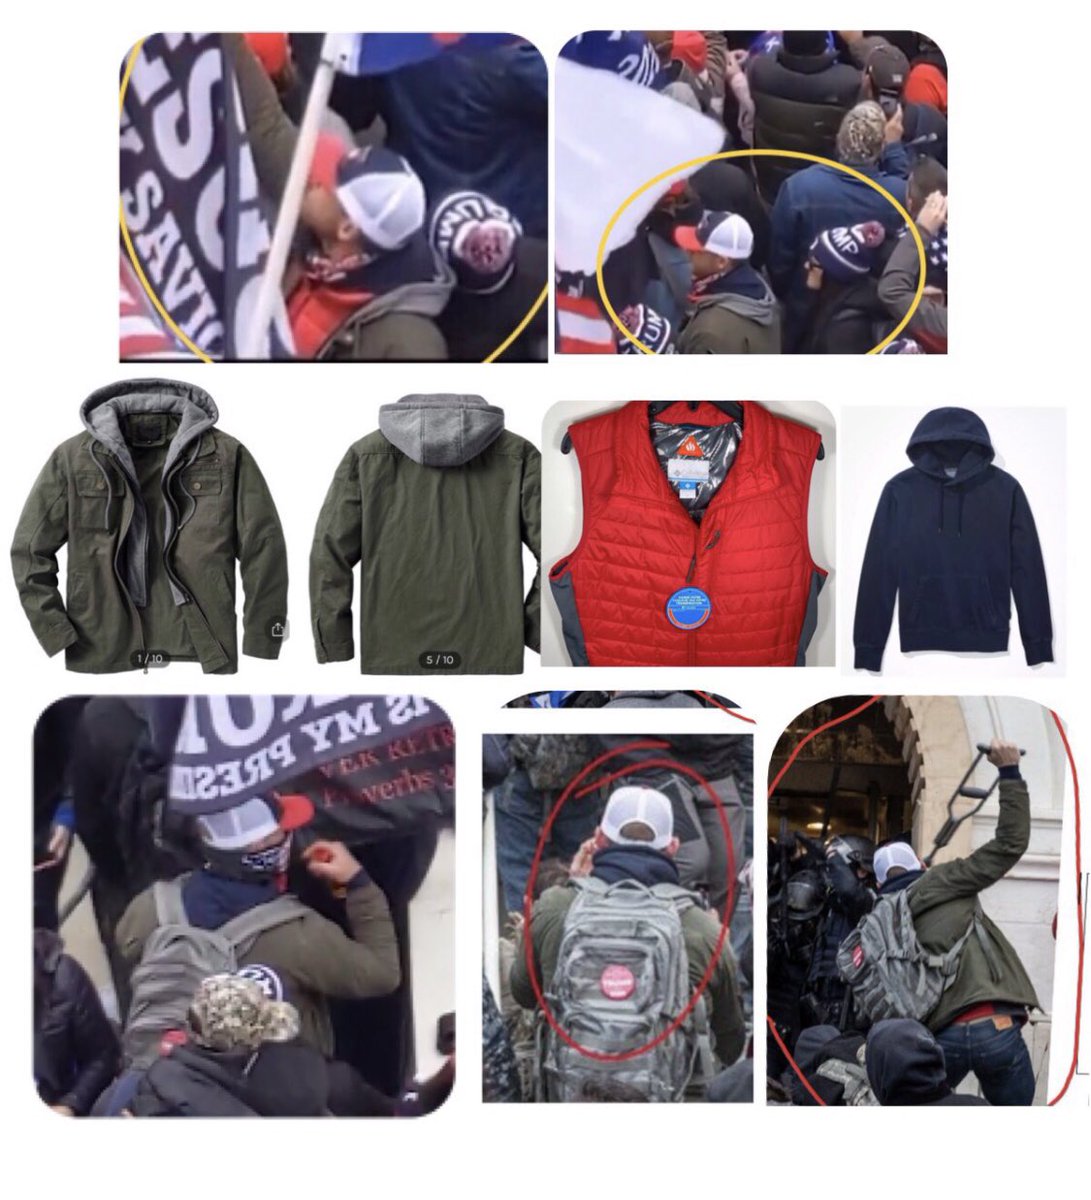  #Scallops is wearing 4 layers of clothing: maroon base layer, then navy hoodie, then red puffer vest, then olive green jacket with gray hood. Gray hood is tucked under backpack and navy hood is pulled out during first attack. 7/